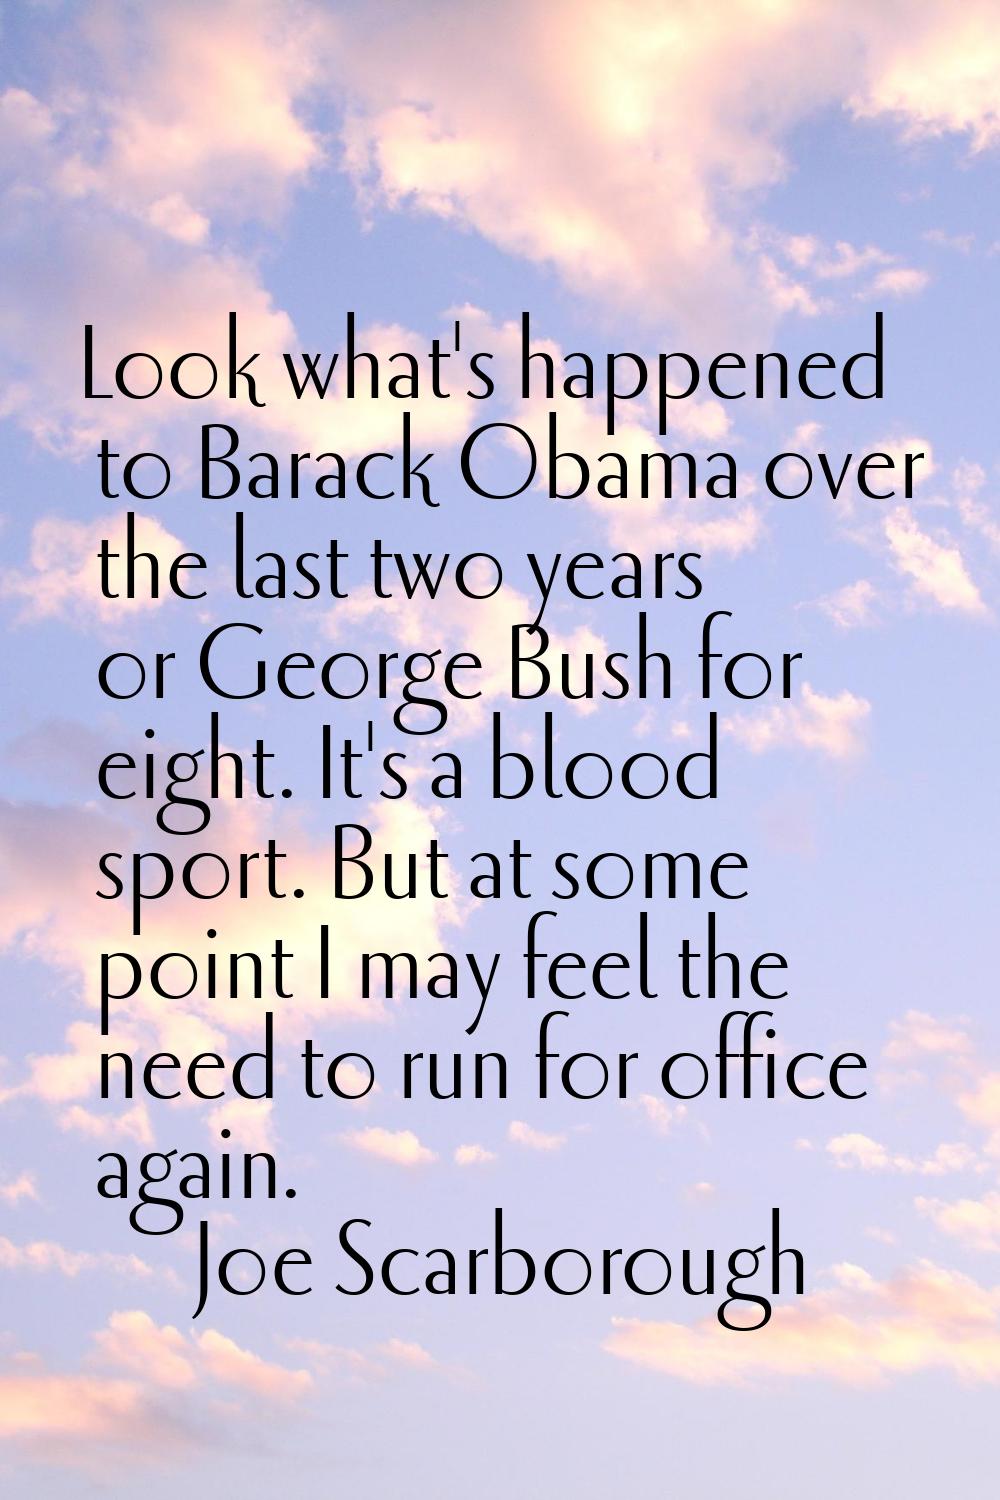 Look what's happened to Barack Obama over the last two years or George Bush for eight. It's a blood